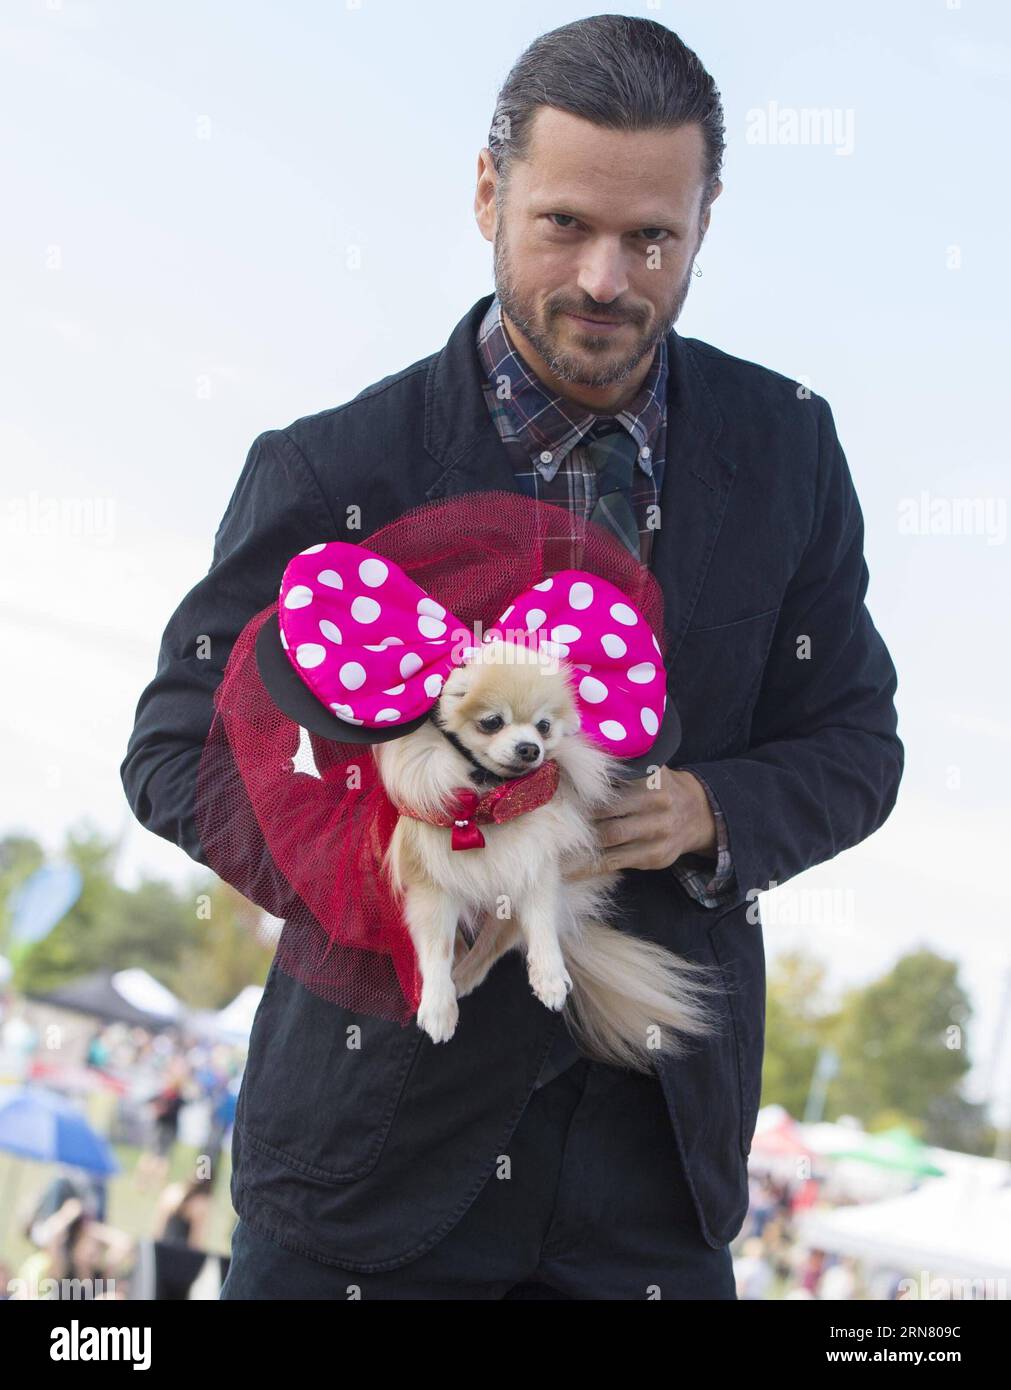 (150927) -- TORONTO, Sept. 27, 2015 -- A model displays a dressed up pet dog on stage during the fashion show event of the 2015 Woofstock at Woodbine Park in Toronto, Canada, Sept. 27, 2015. Woofstock is the largest outdoor festival for dogs in North America. ) CANADA-TORONTO-WOOFSTOCK-PET DOG-FASHION SHOW ZouxZheng PUBLICATIONxNOTxINxCHN   Toronto Sept 27 2015 a Model Displays a Dressed up Pet Dog ON Stage during The Fashion Show Event of The 2015 Woofstock AT Woodbine Park in Toronto Canada Sept 27 2015 Woofstock IS The Largest Outdoor Festival for Dogs in North America Canada Toronto Woofst Stock Photo